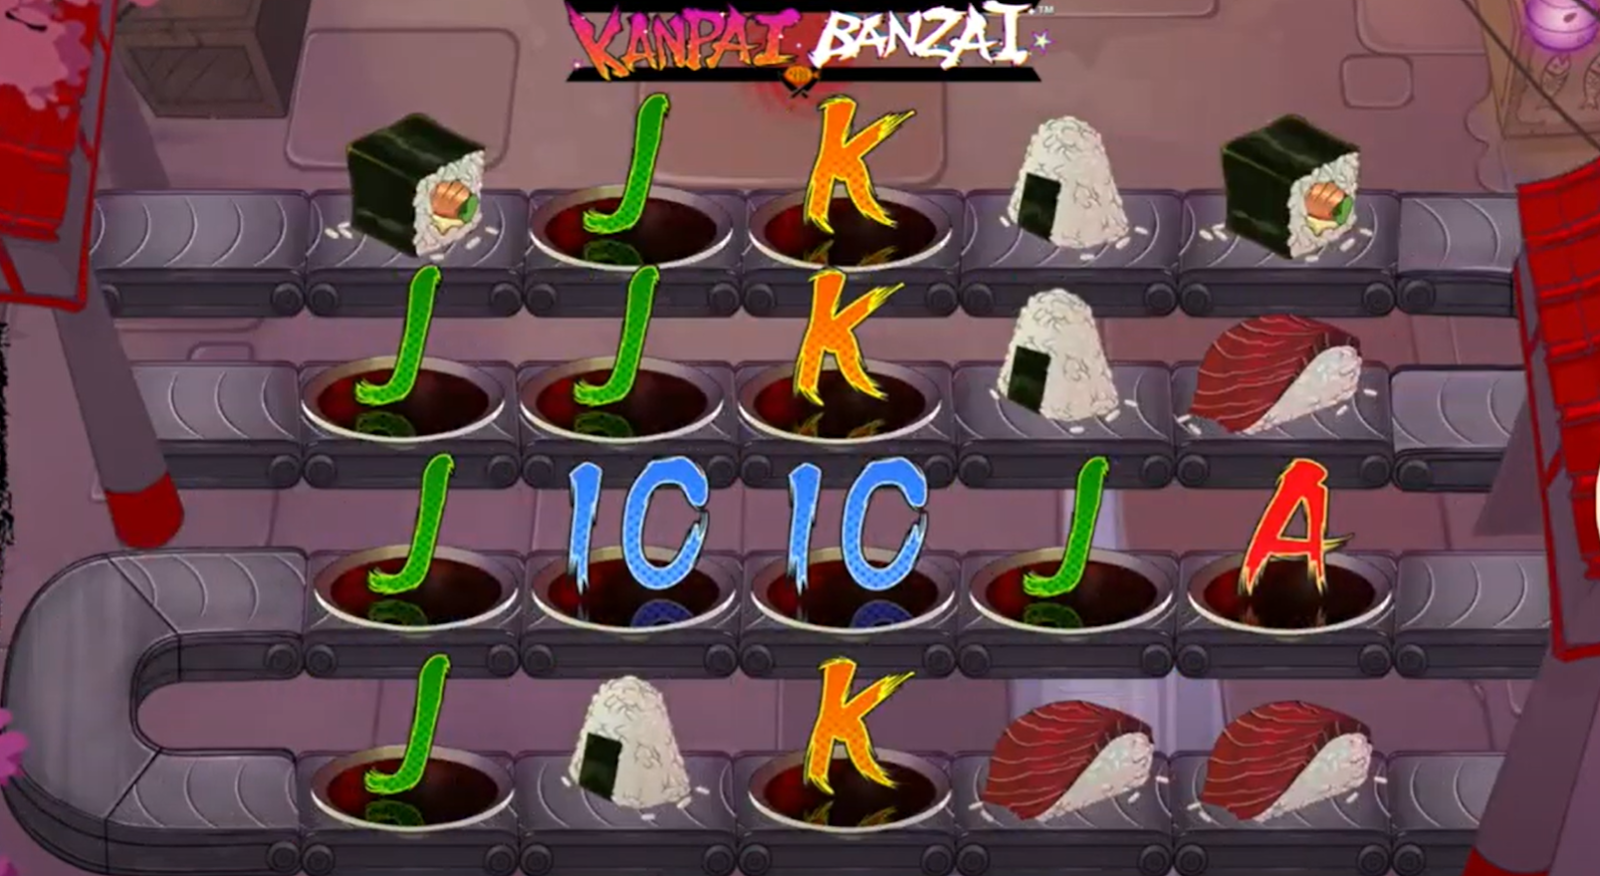 Kanpai Banzai is one of the best new casino games you can play at Betfred Casino